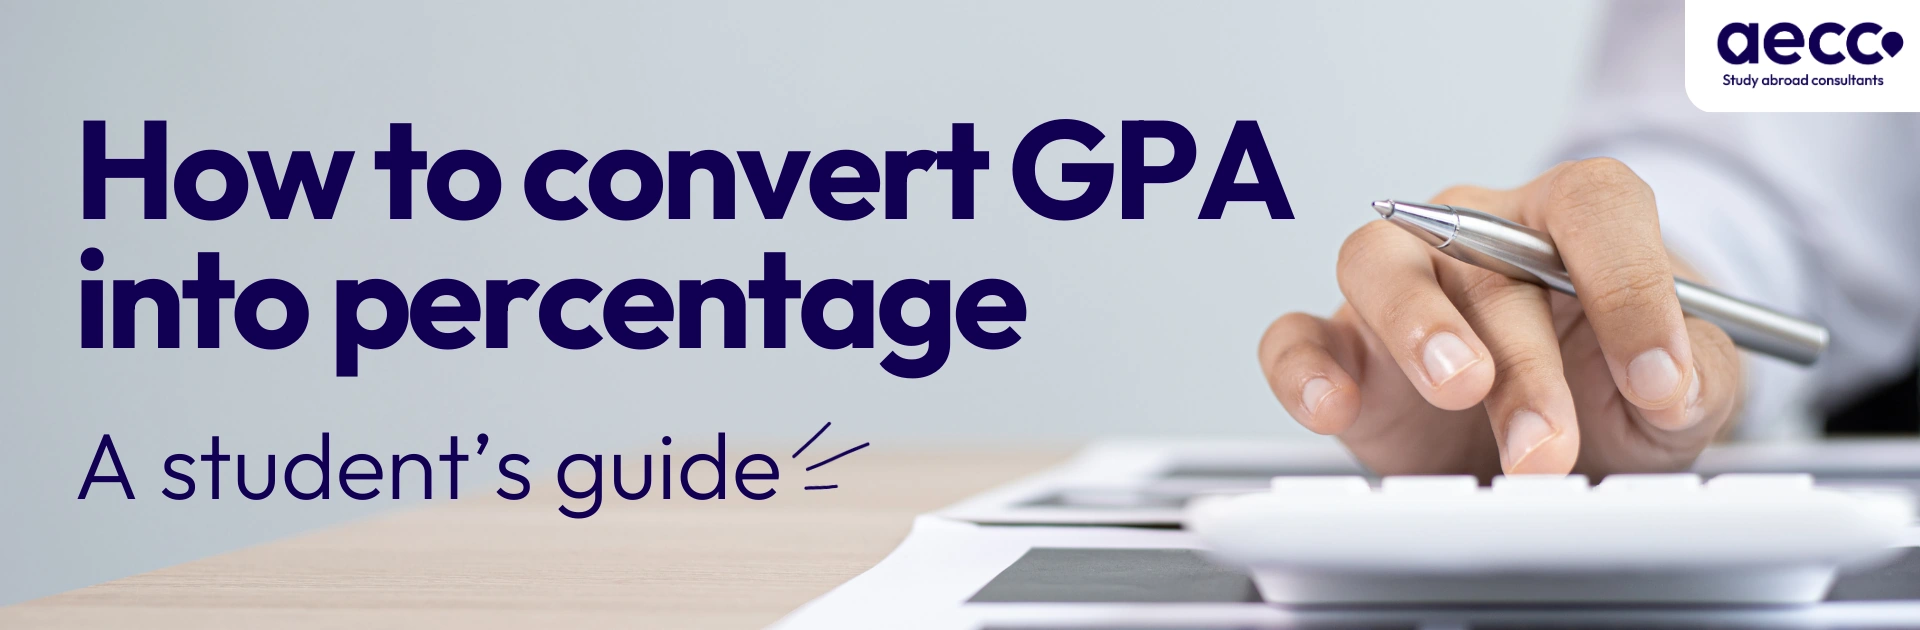 How to Convert GPA to Percentage